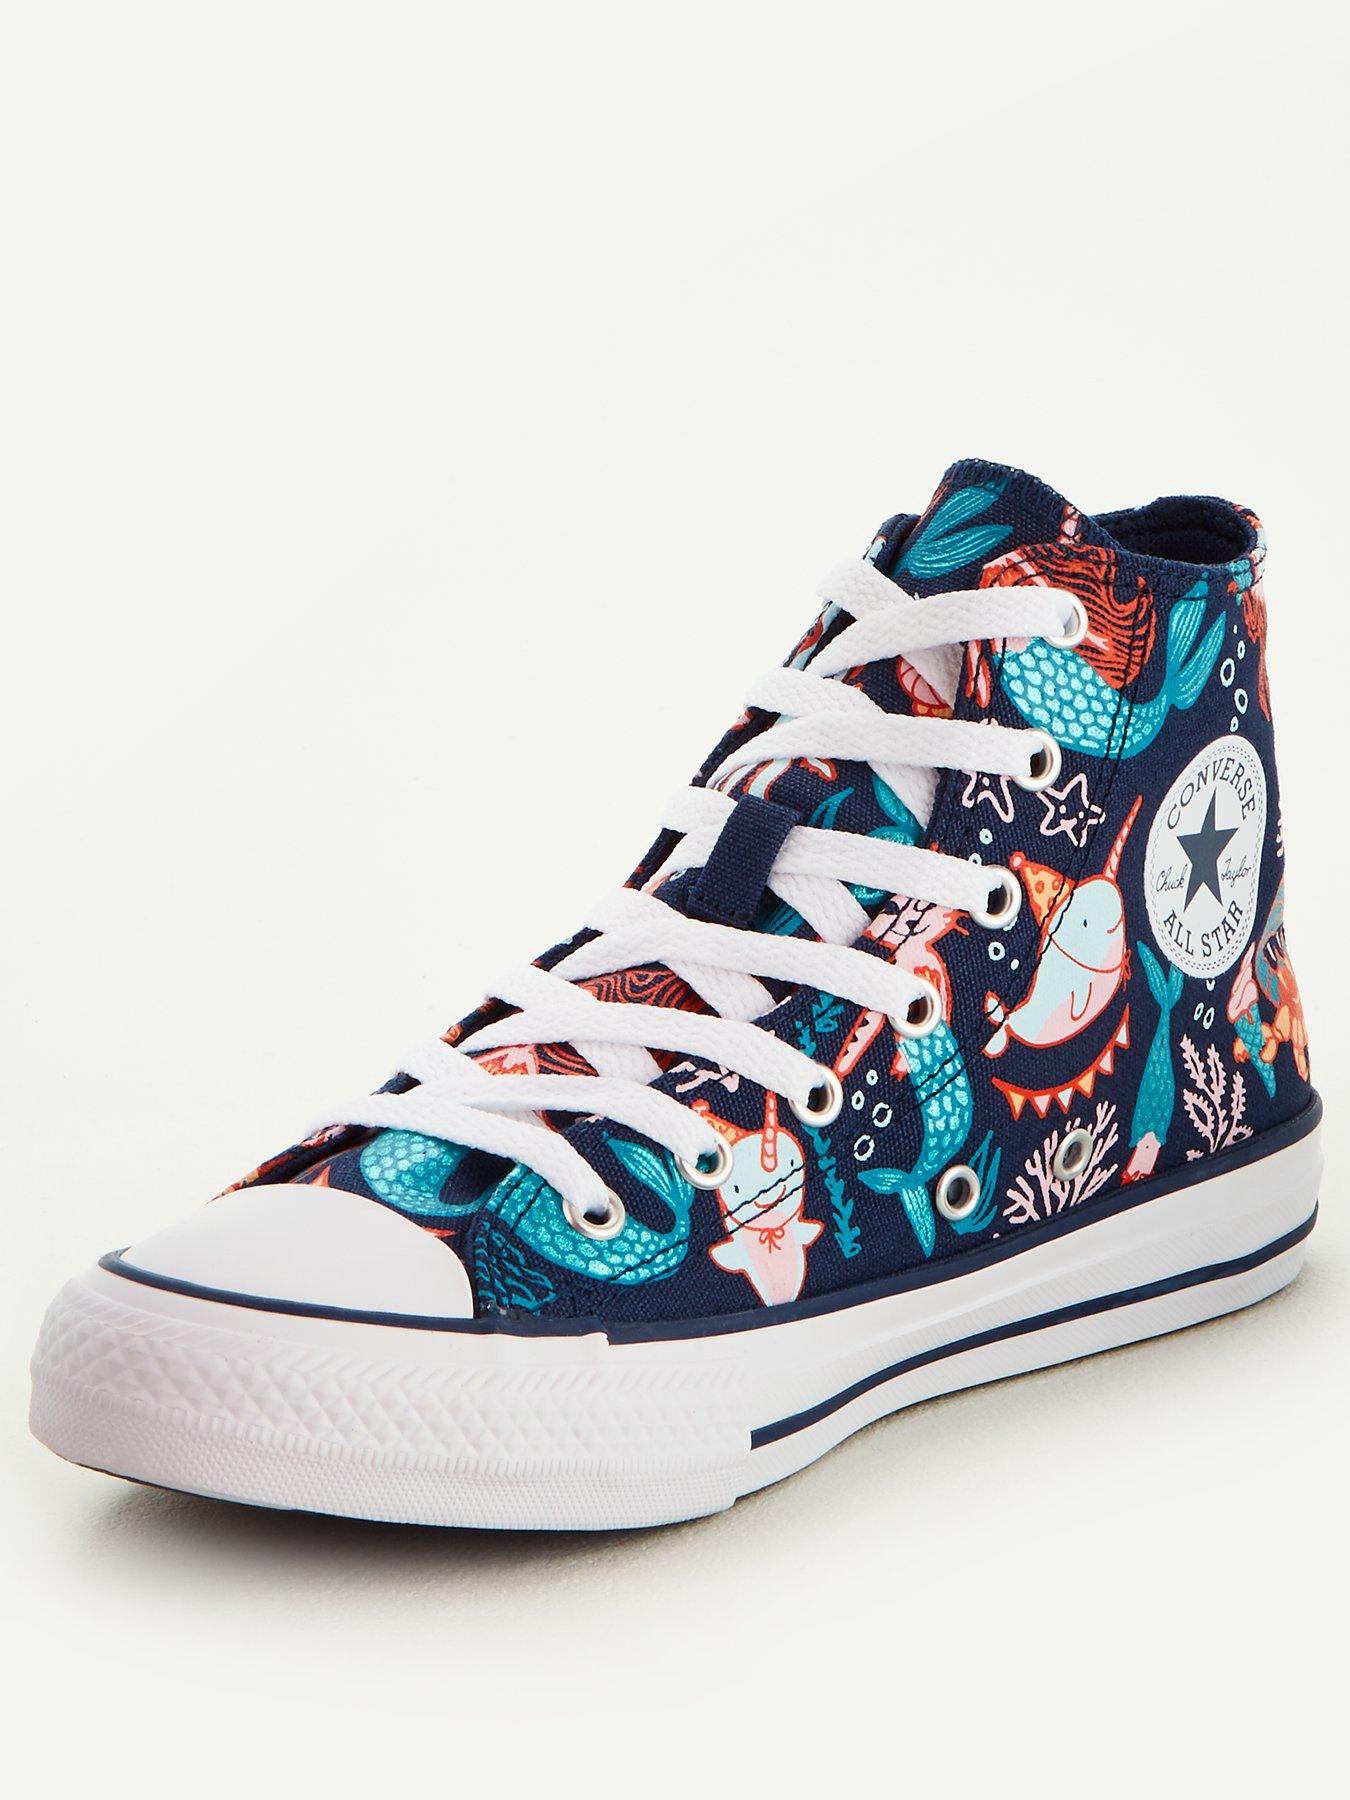 converse childrens trainers